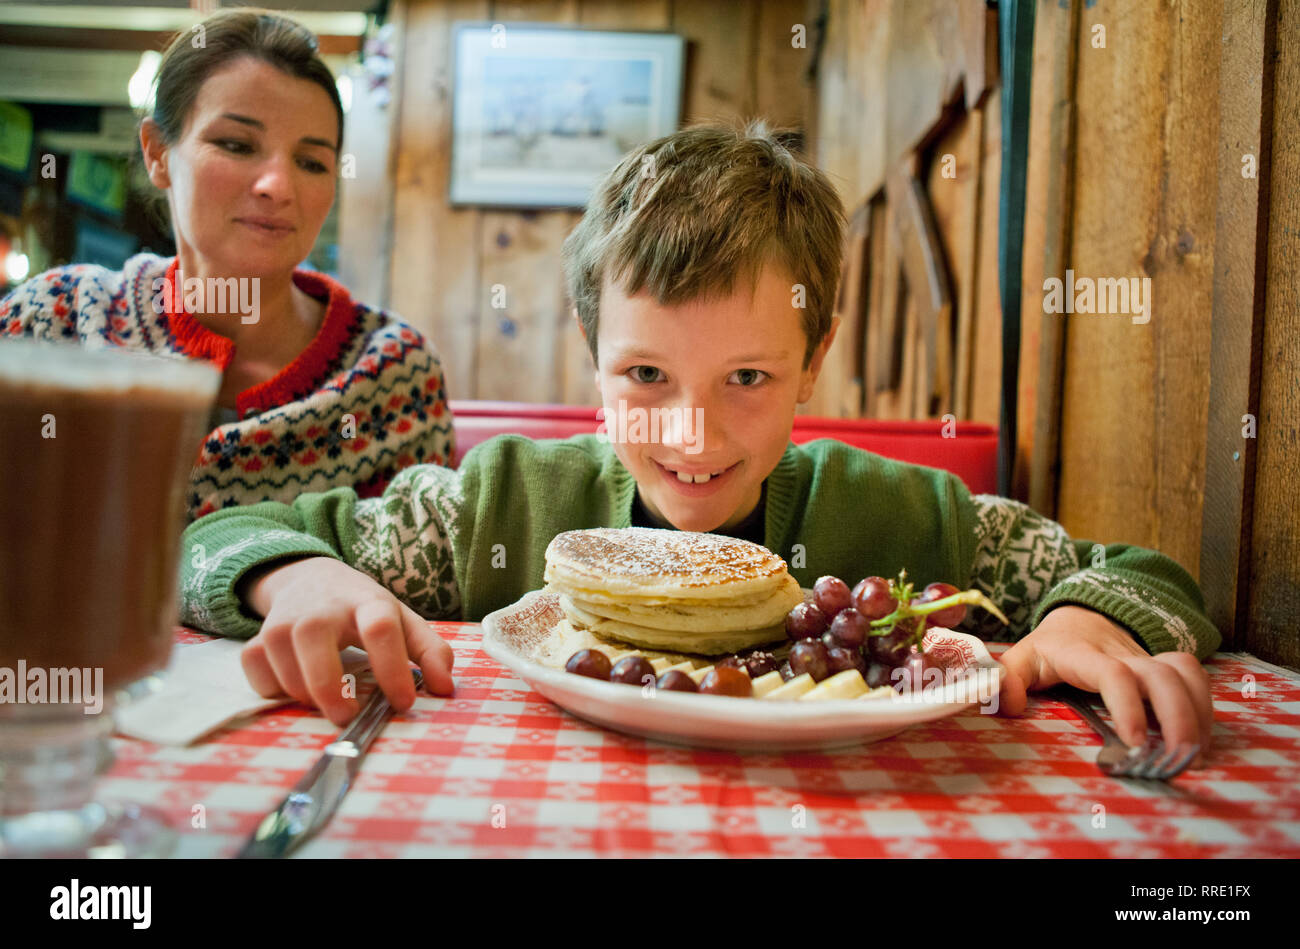 Portrait of a young boy eating breakfast at a diner. Stock Photo